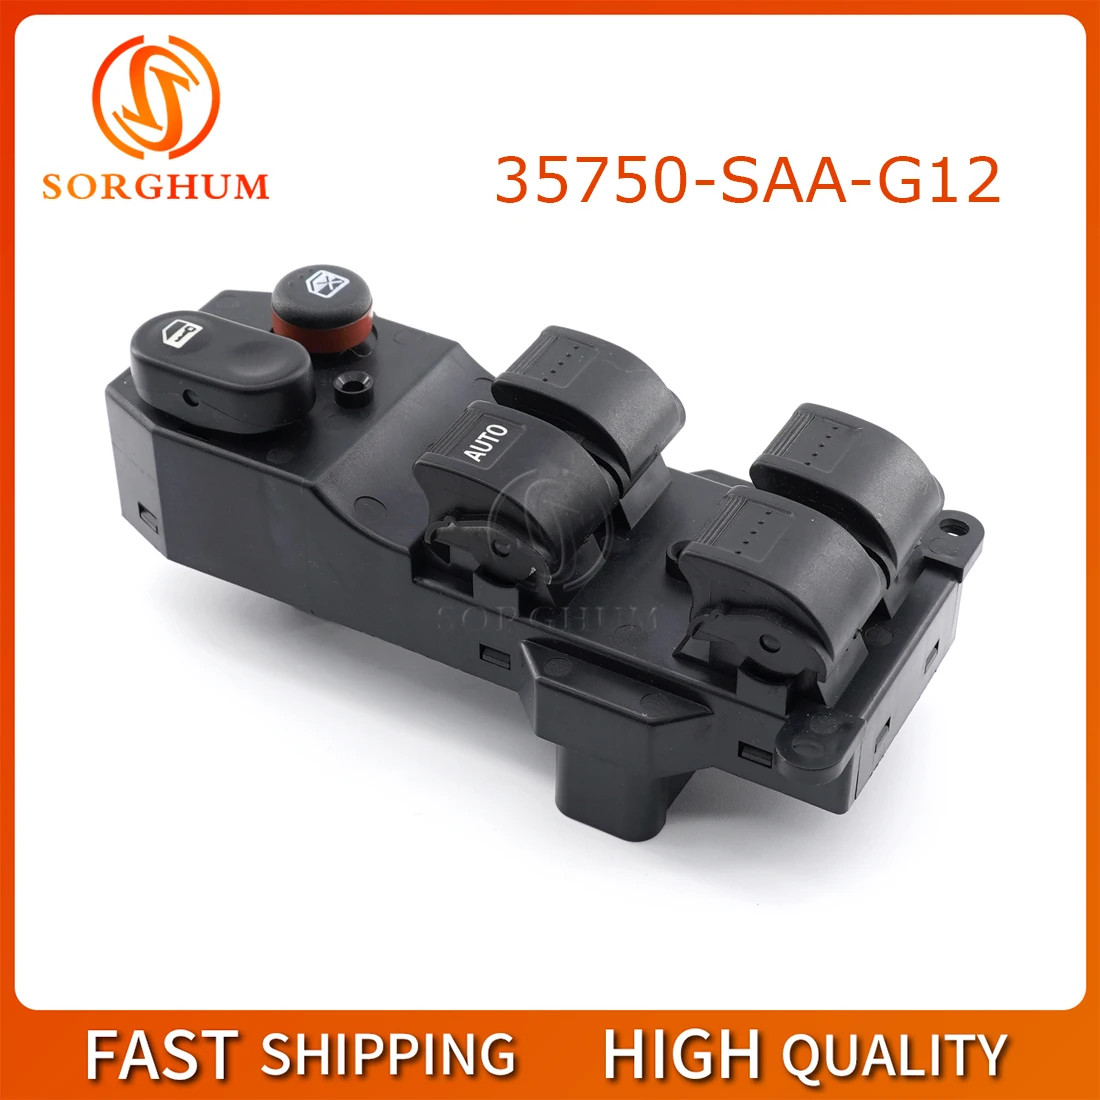 

SORGHUM 35750-SAA-G12 Electric Power Window Lifter Control Switch For Honda Jazz 2003 08 Car Accessories 35750-SEL-P02 35750SELP